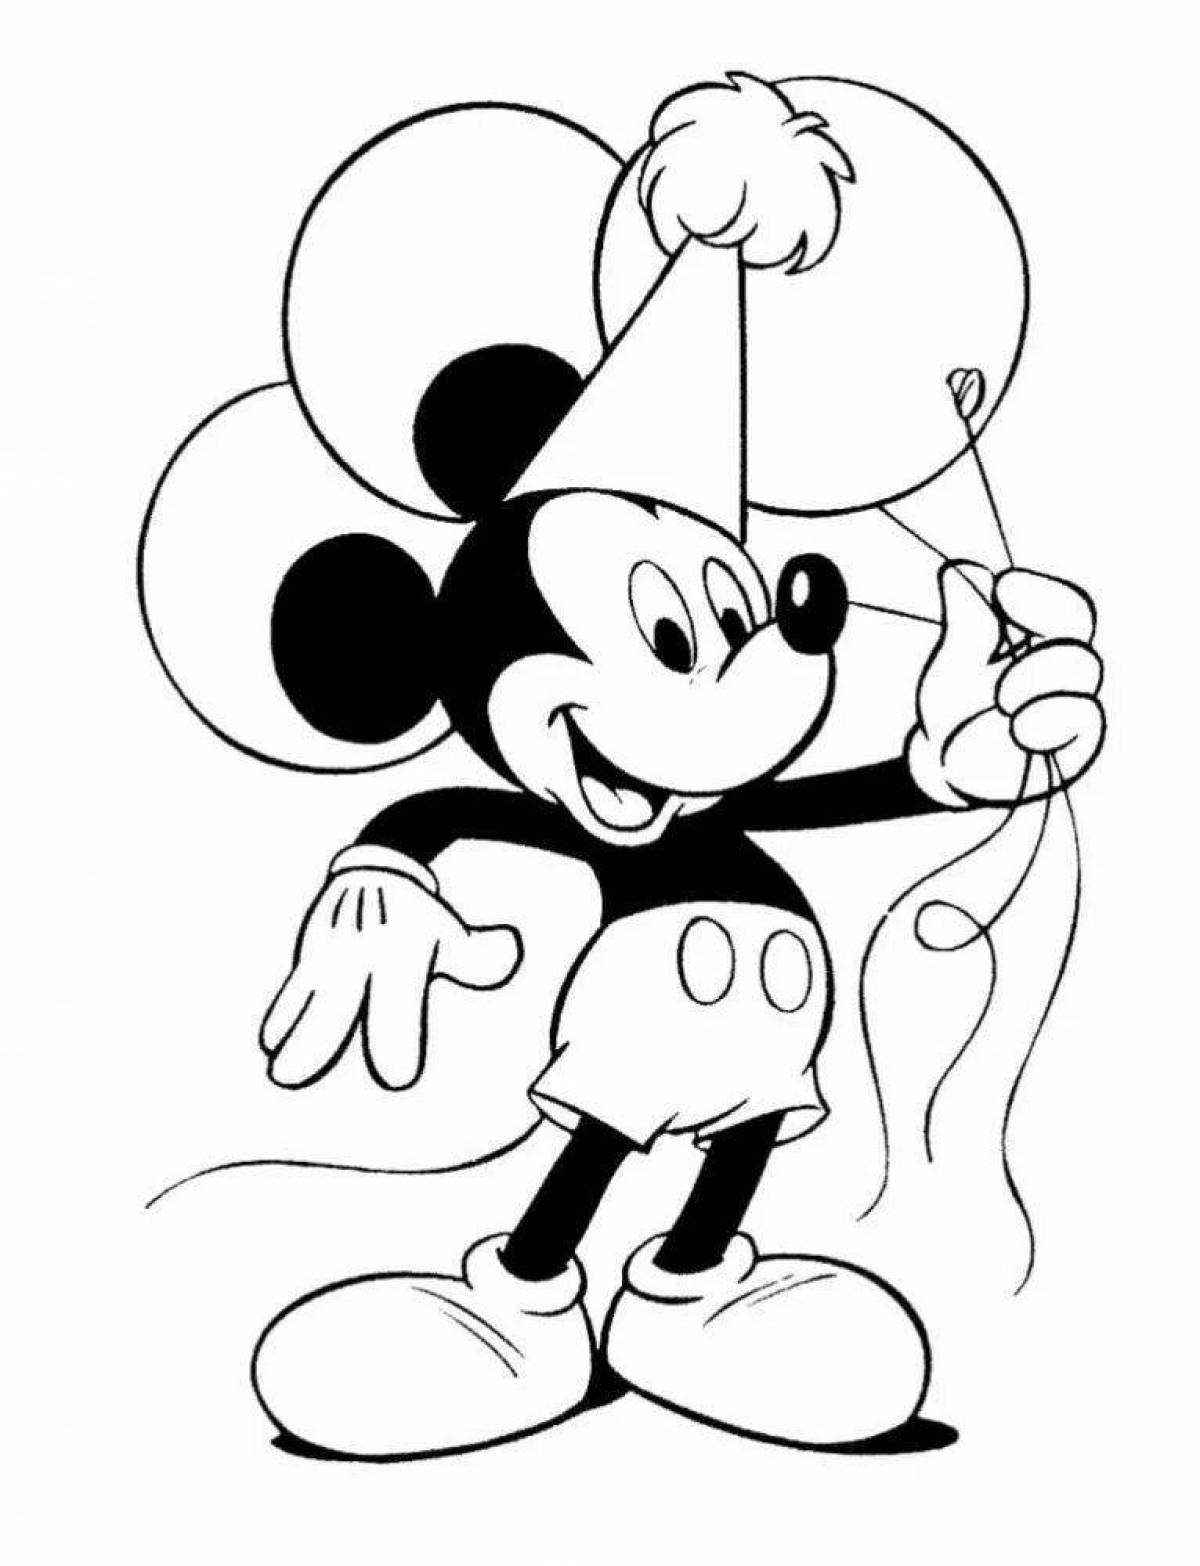 Mickey mouse for kids #10